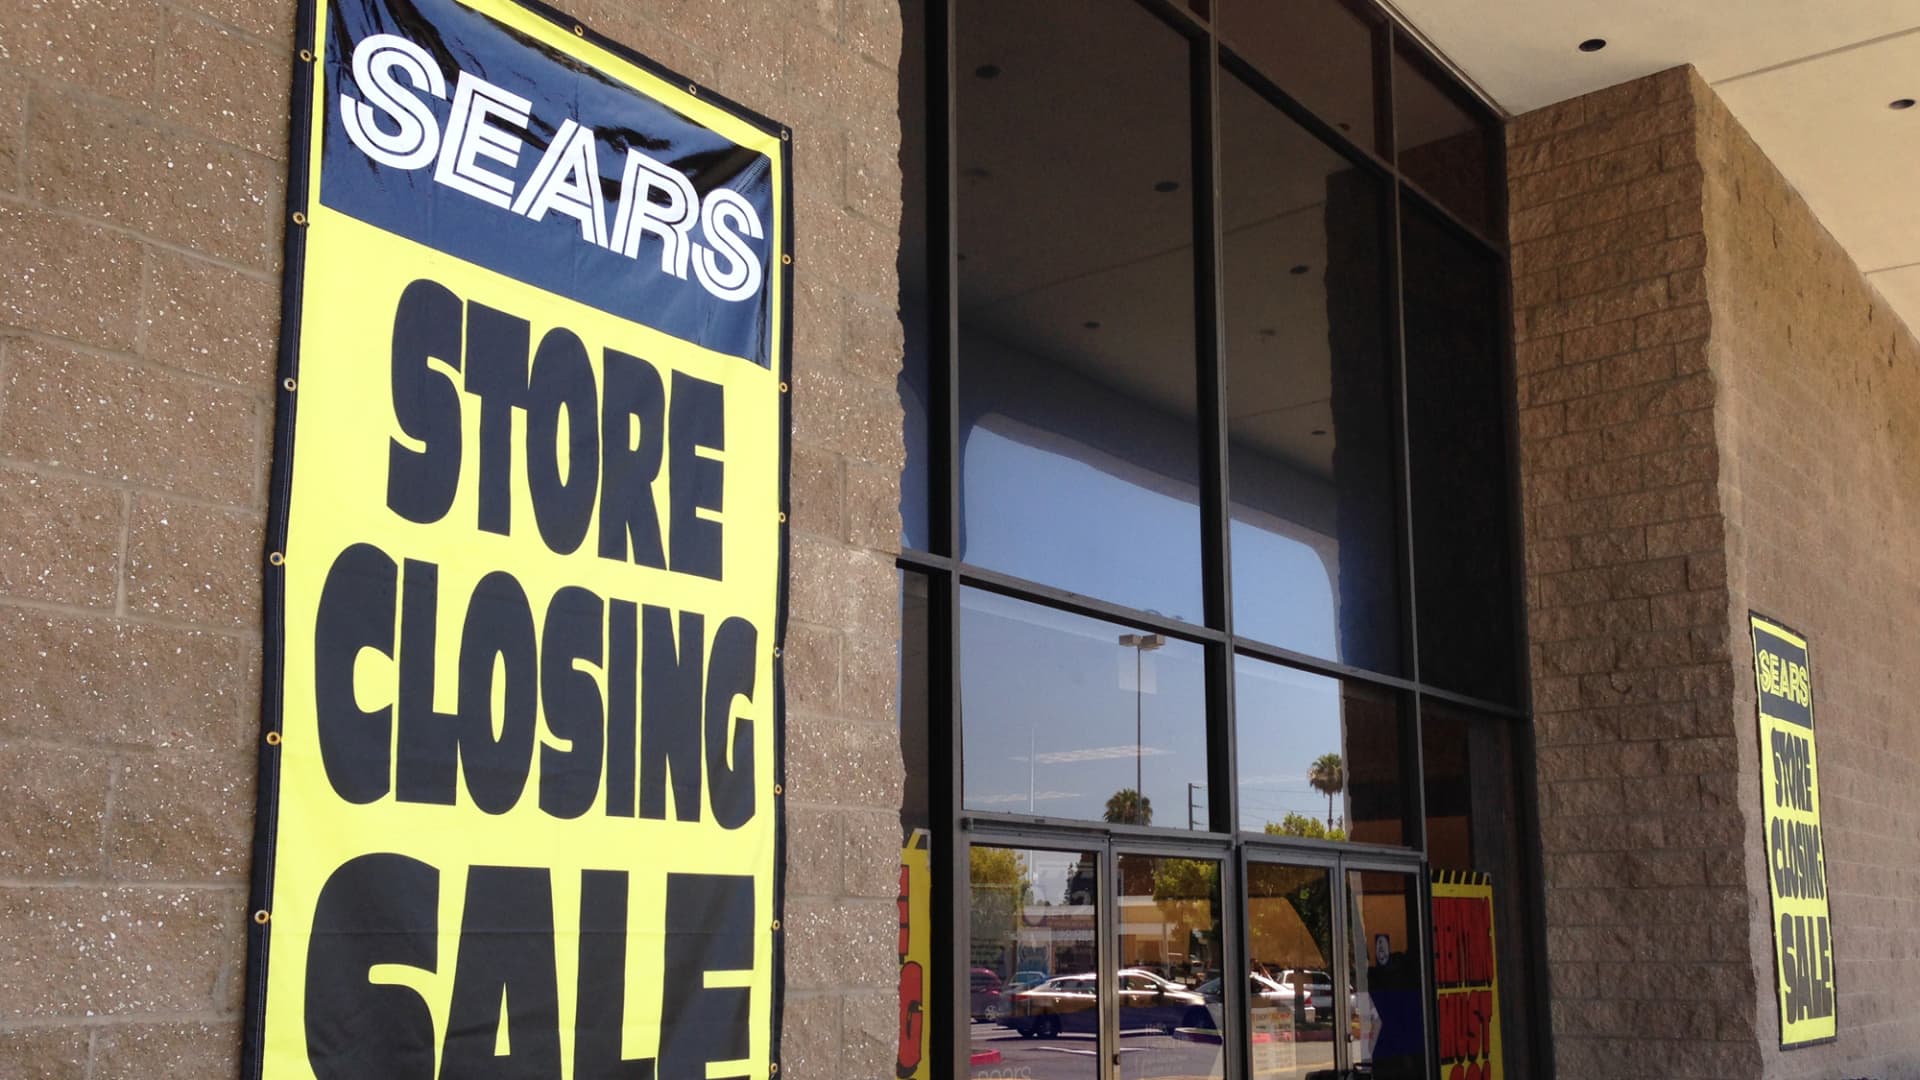 Sears is closing over 100 more stores